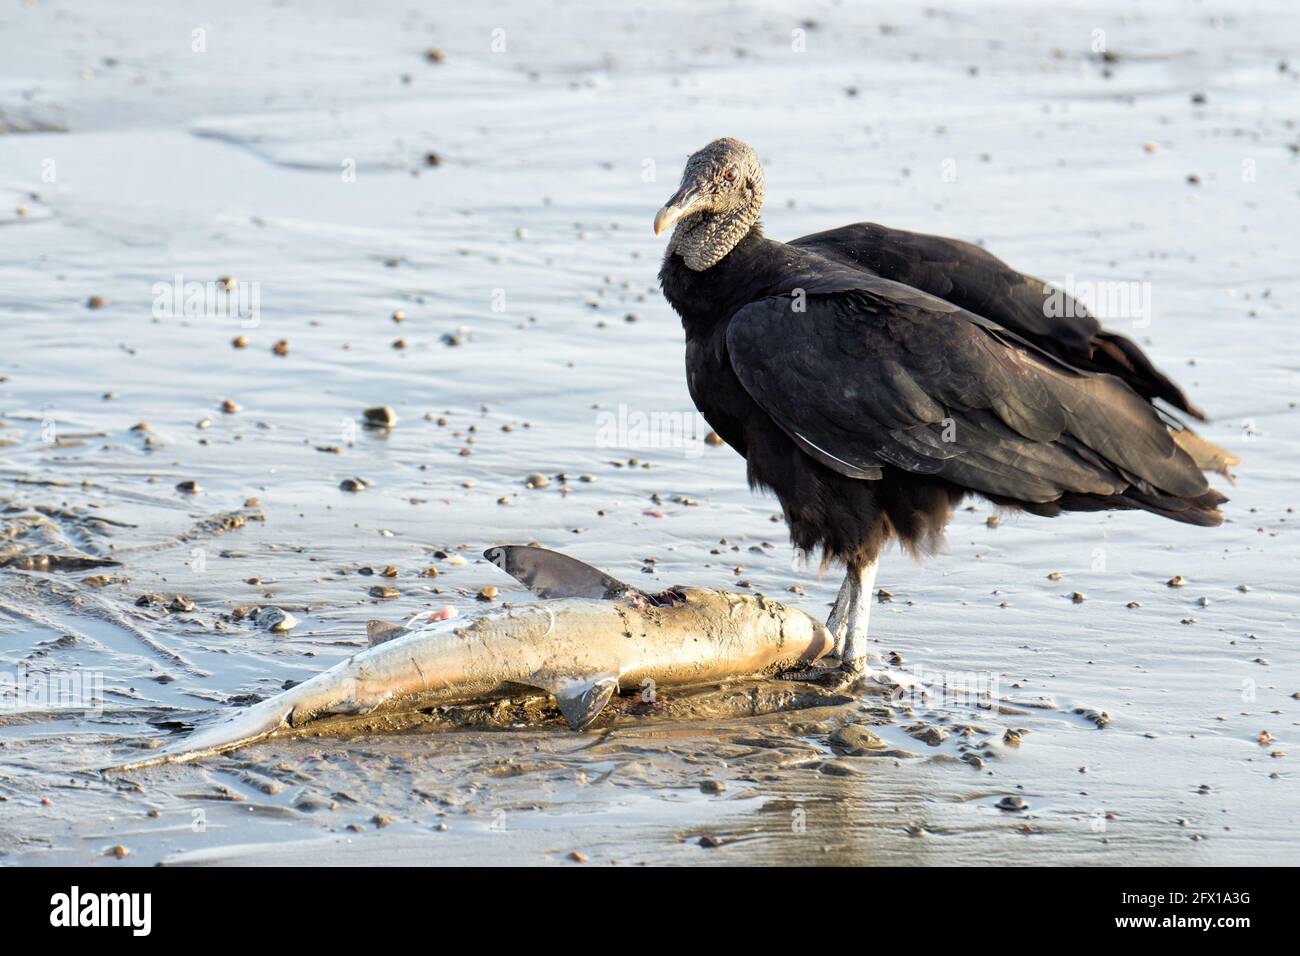 Black vulture (coragyps atratus) standing by a corpse of a baby shark washed ashore. Wildlife of Costa Rica. Stock Photo